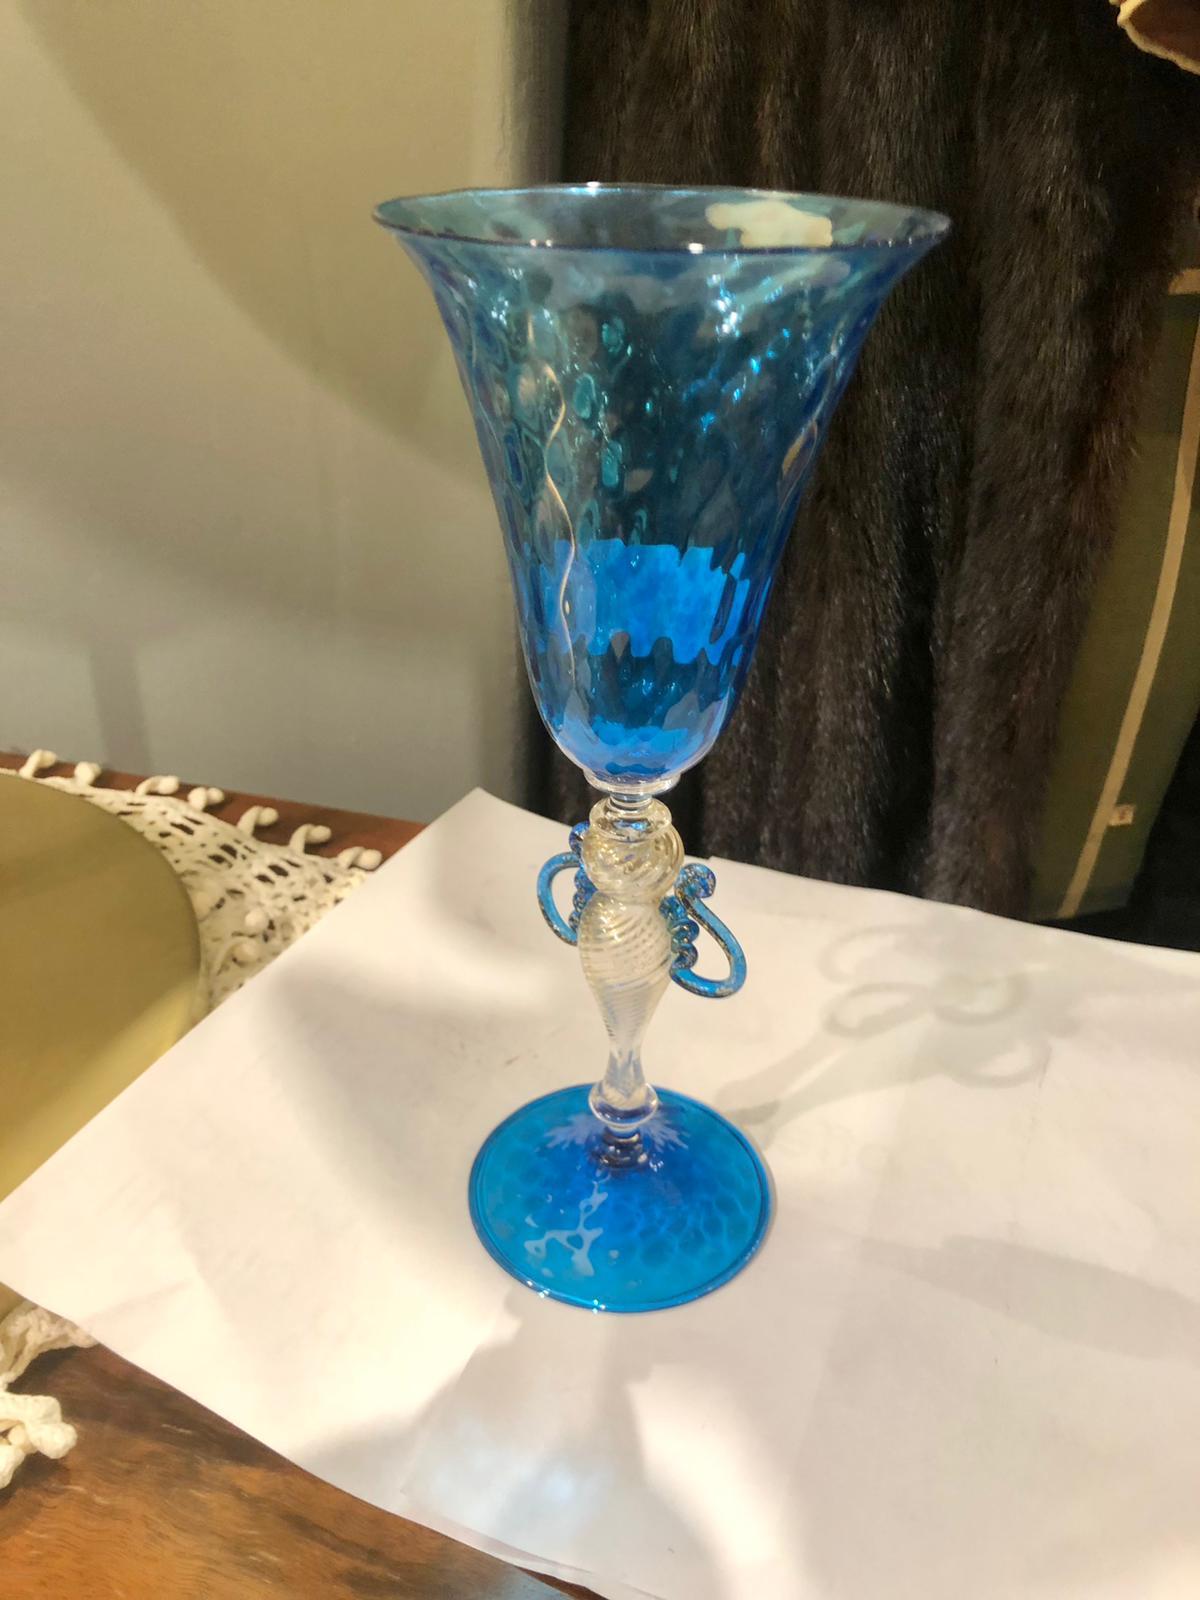 Refined artistic glass goblet, Italy, Murano production around the 70s. Original brand present in Nason production. Goblet with a particular design, in clear glass handmade in shades of Blue. Perfect condition.